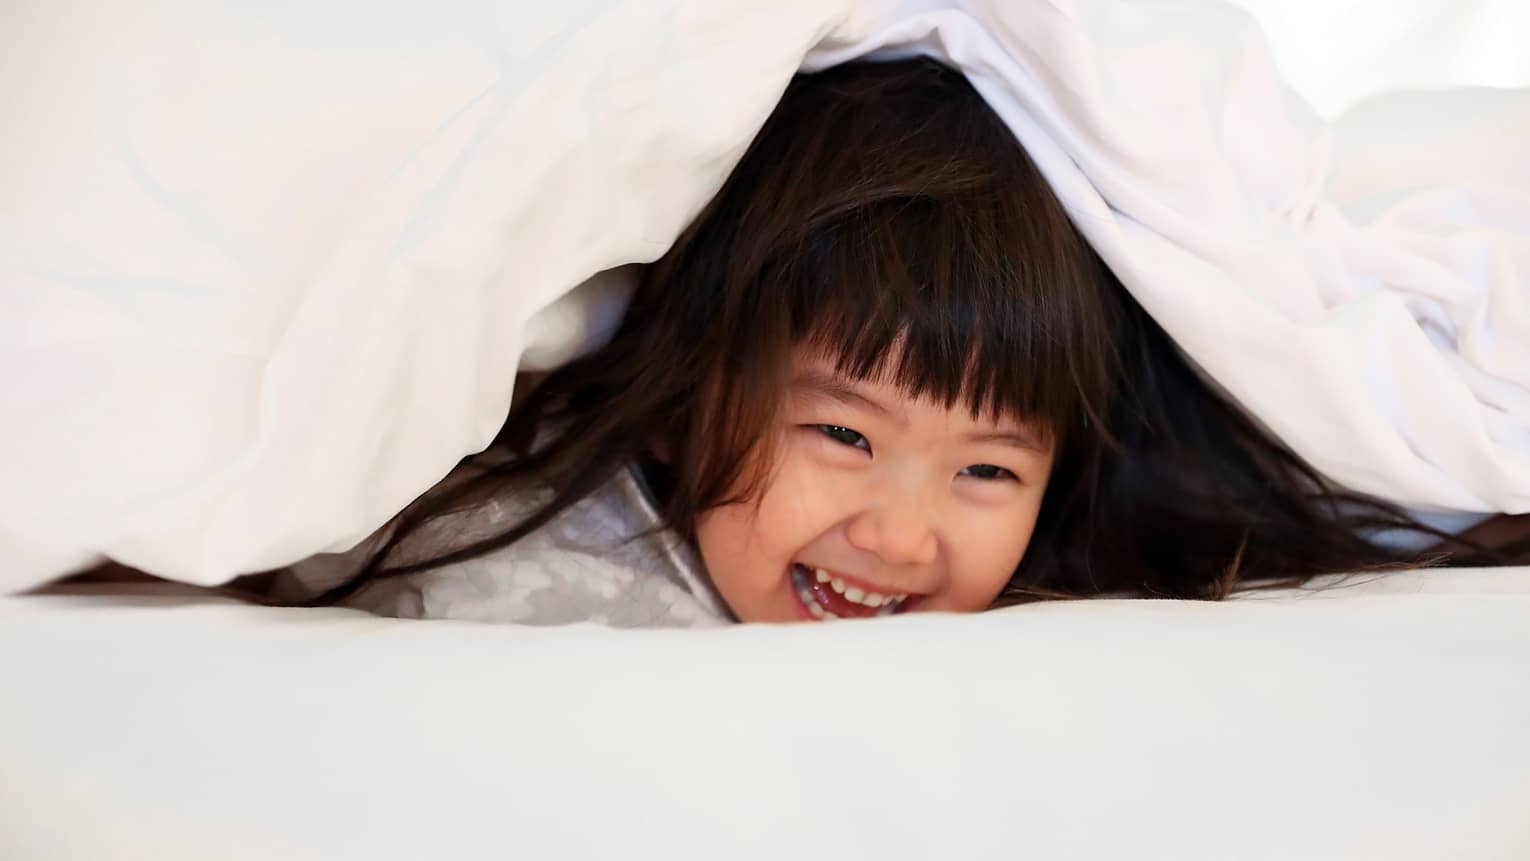 Young girl laughing as she plays under a white bed sheet